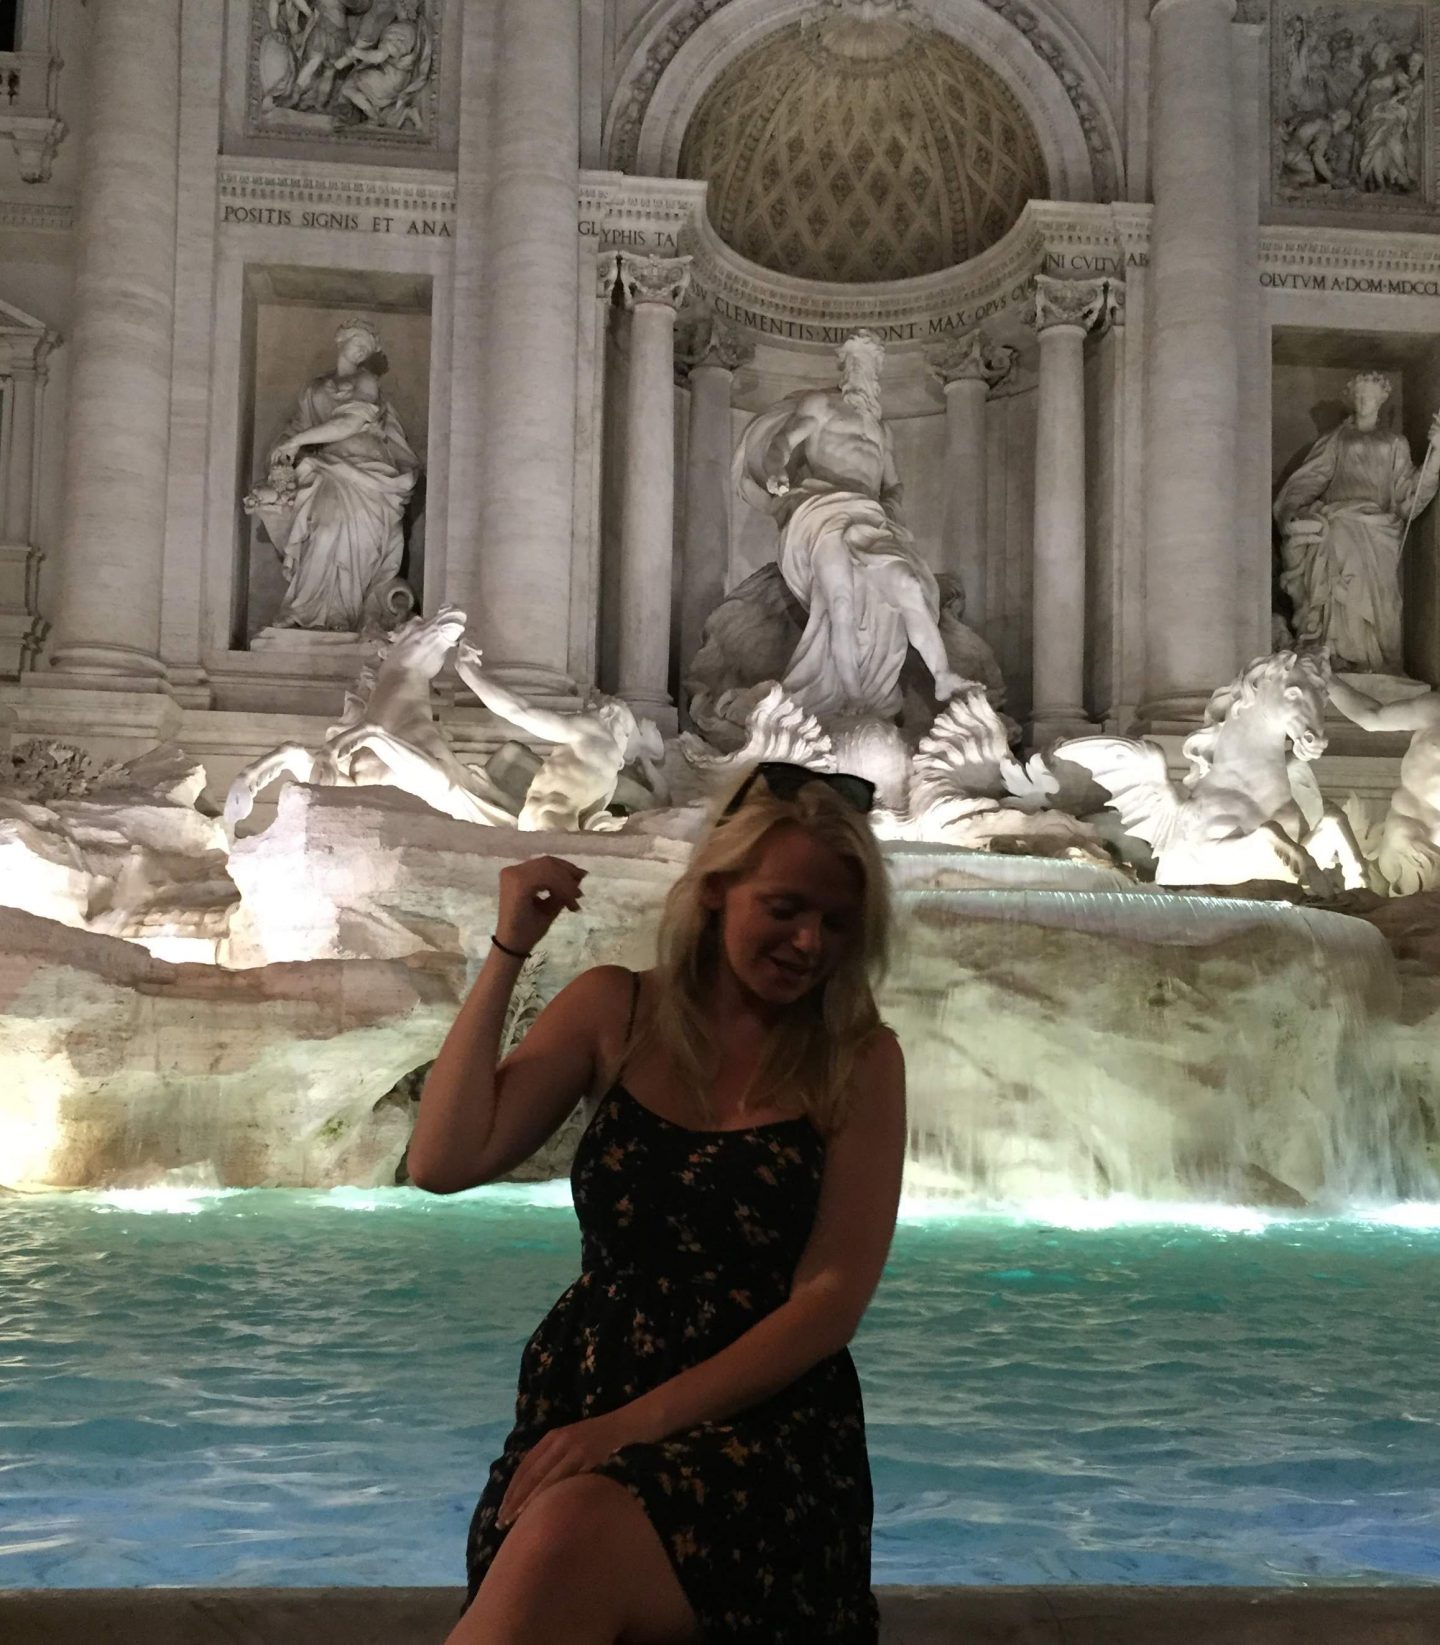 Laura throwing a coin in the Trevi Fountain